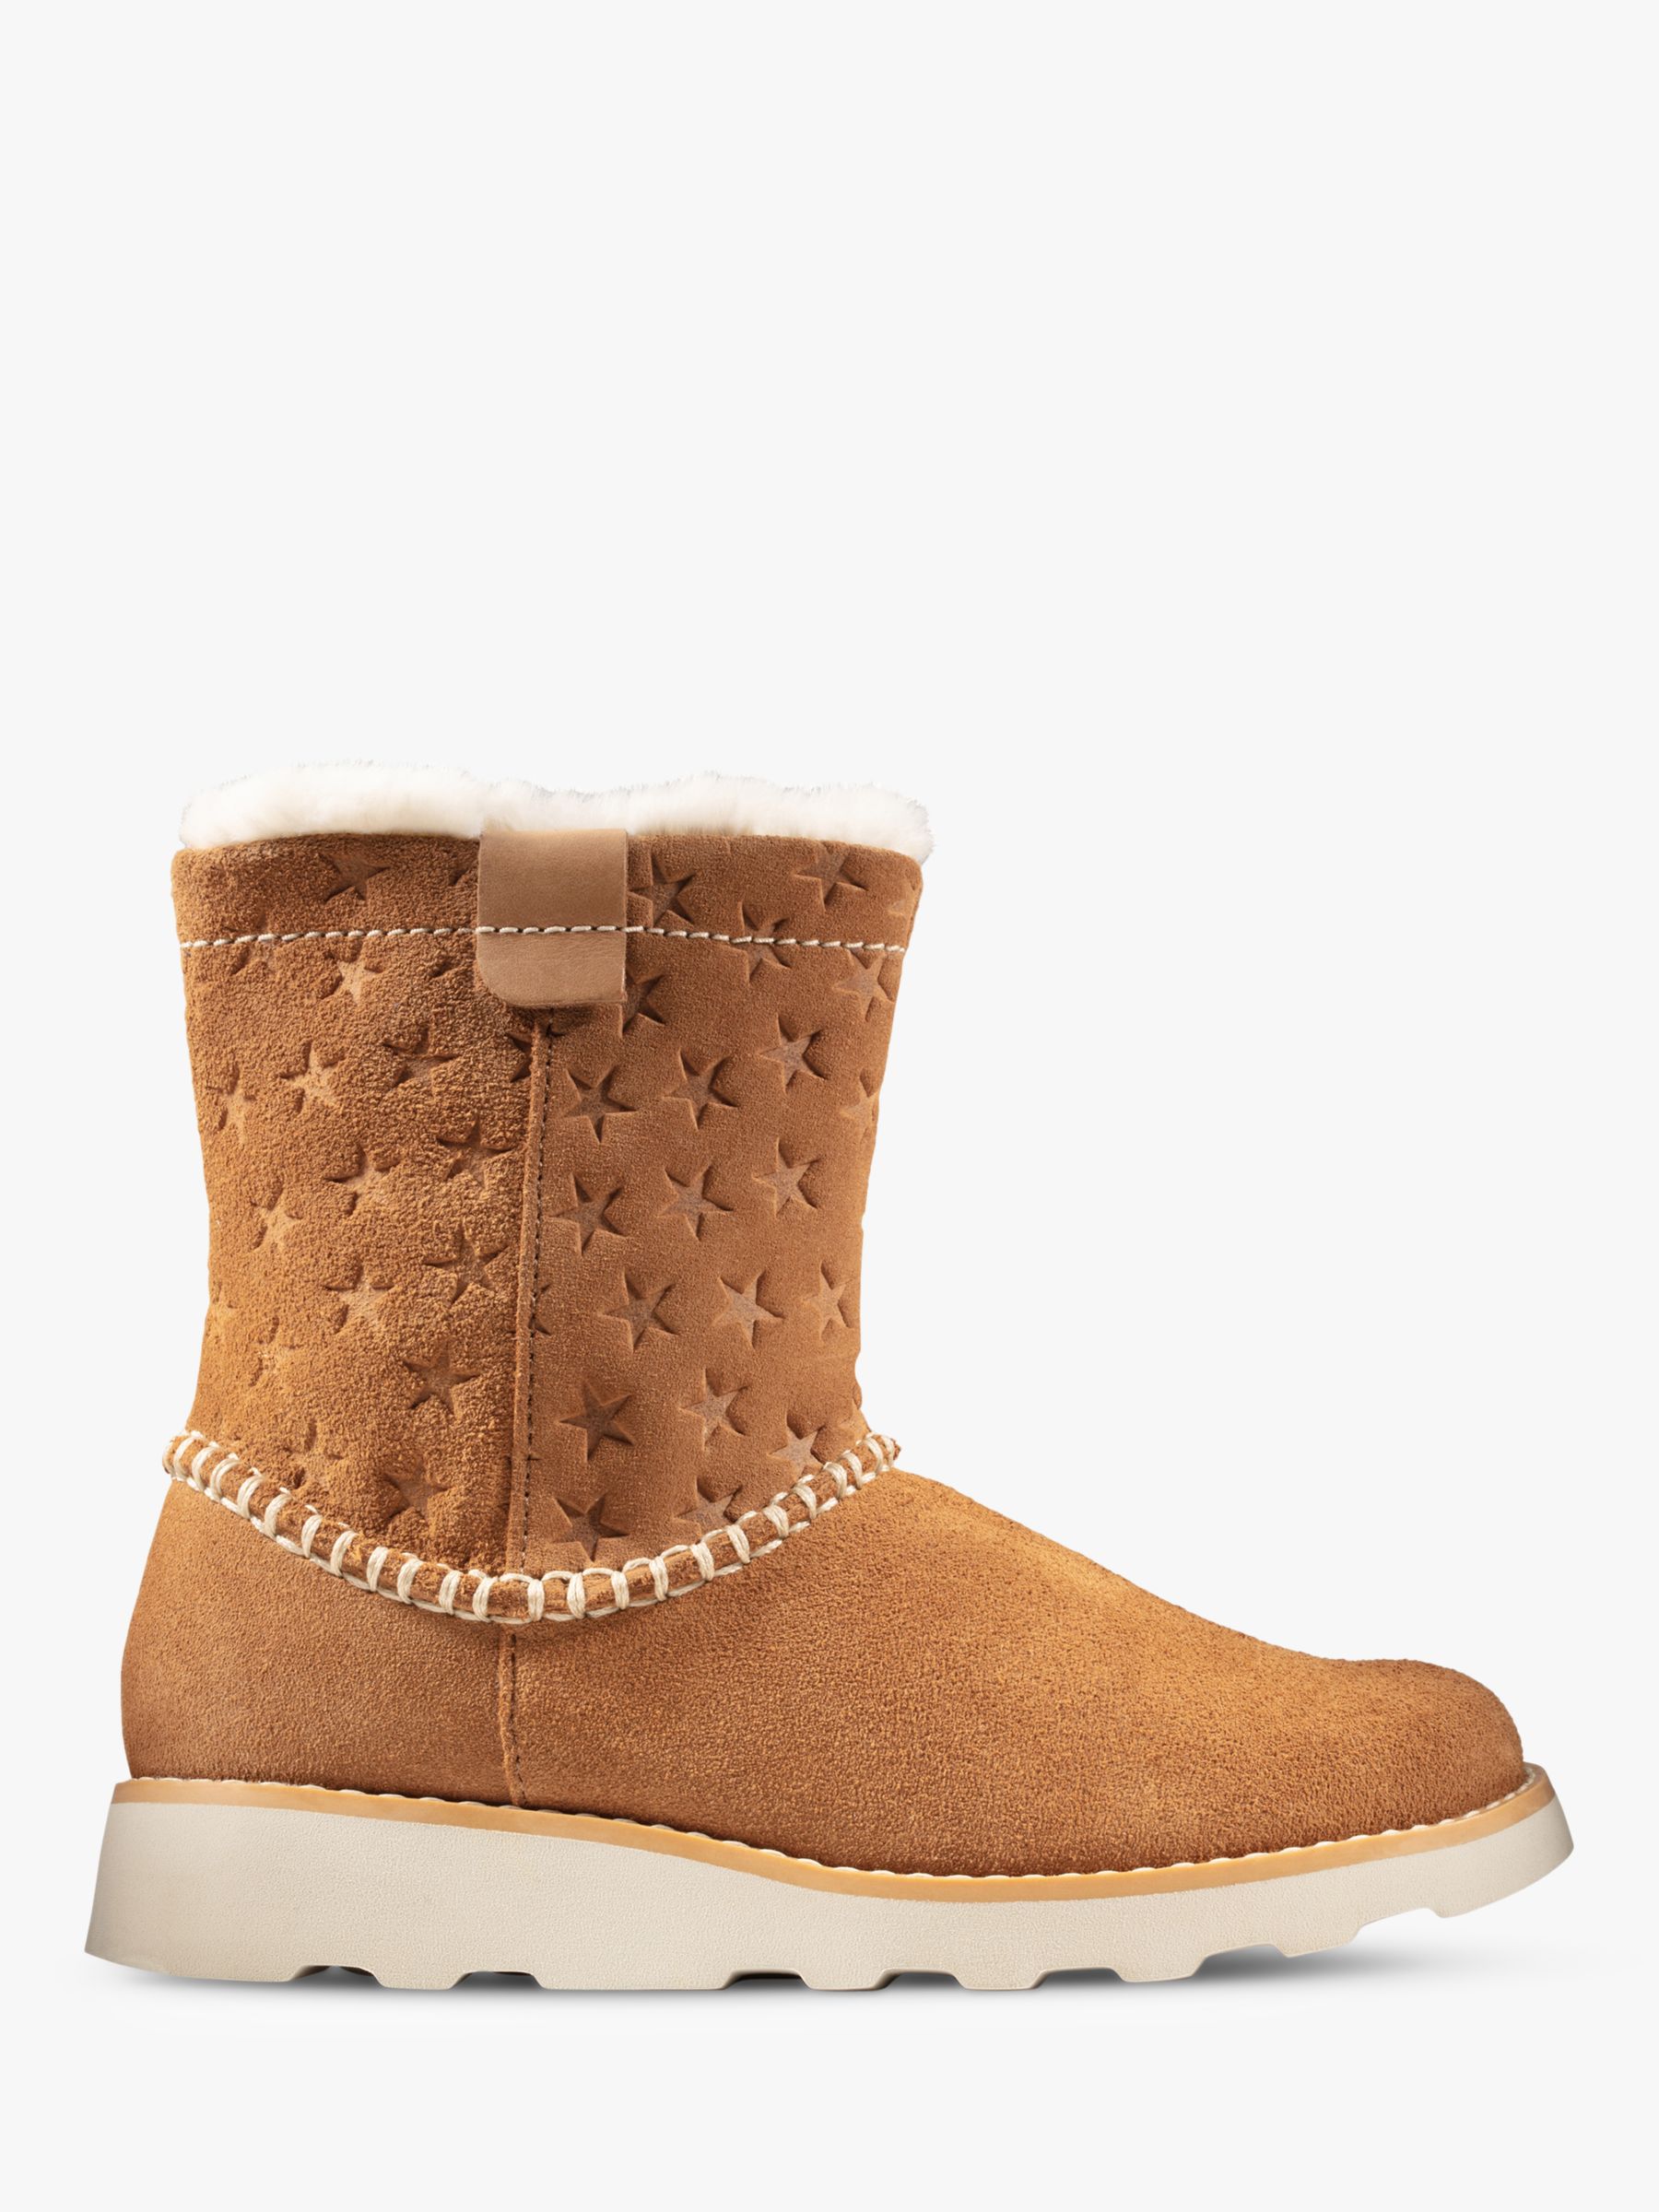 clarks snow boots toddler